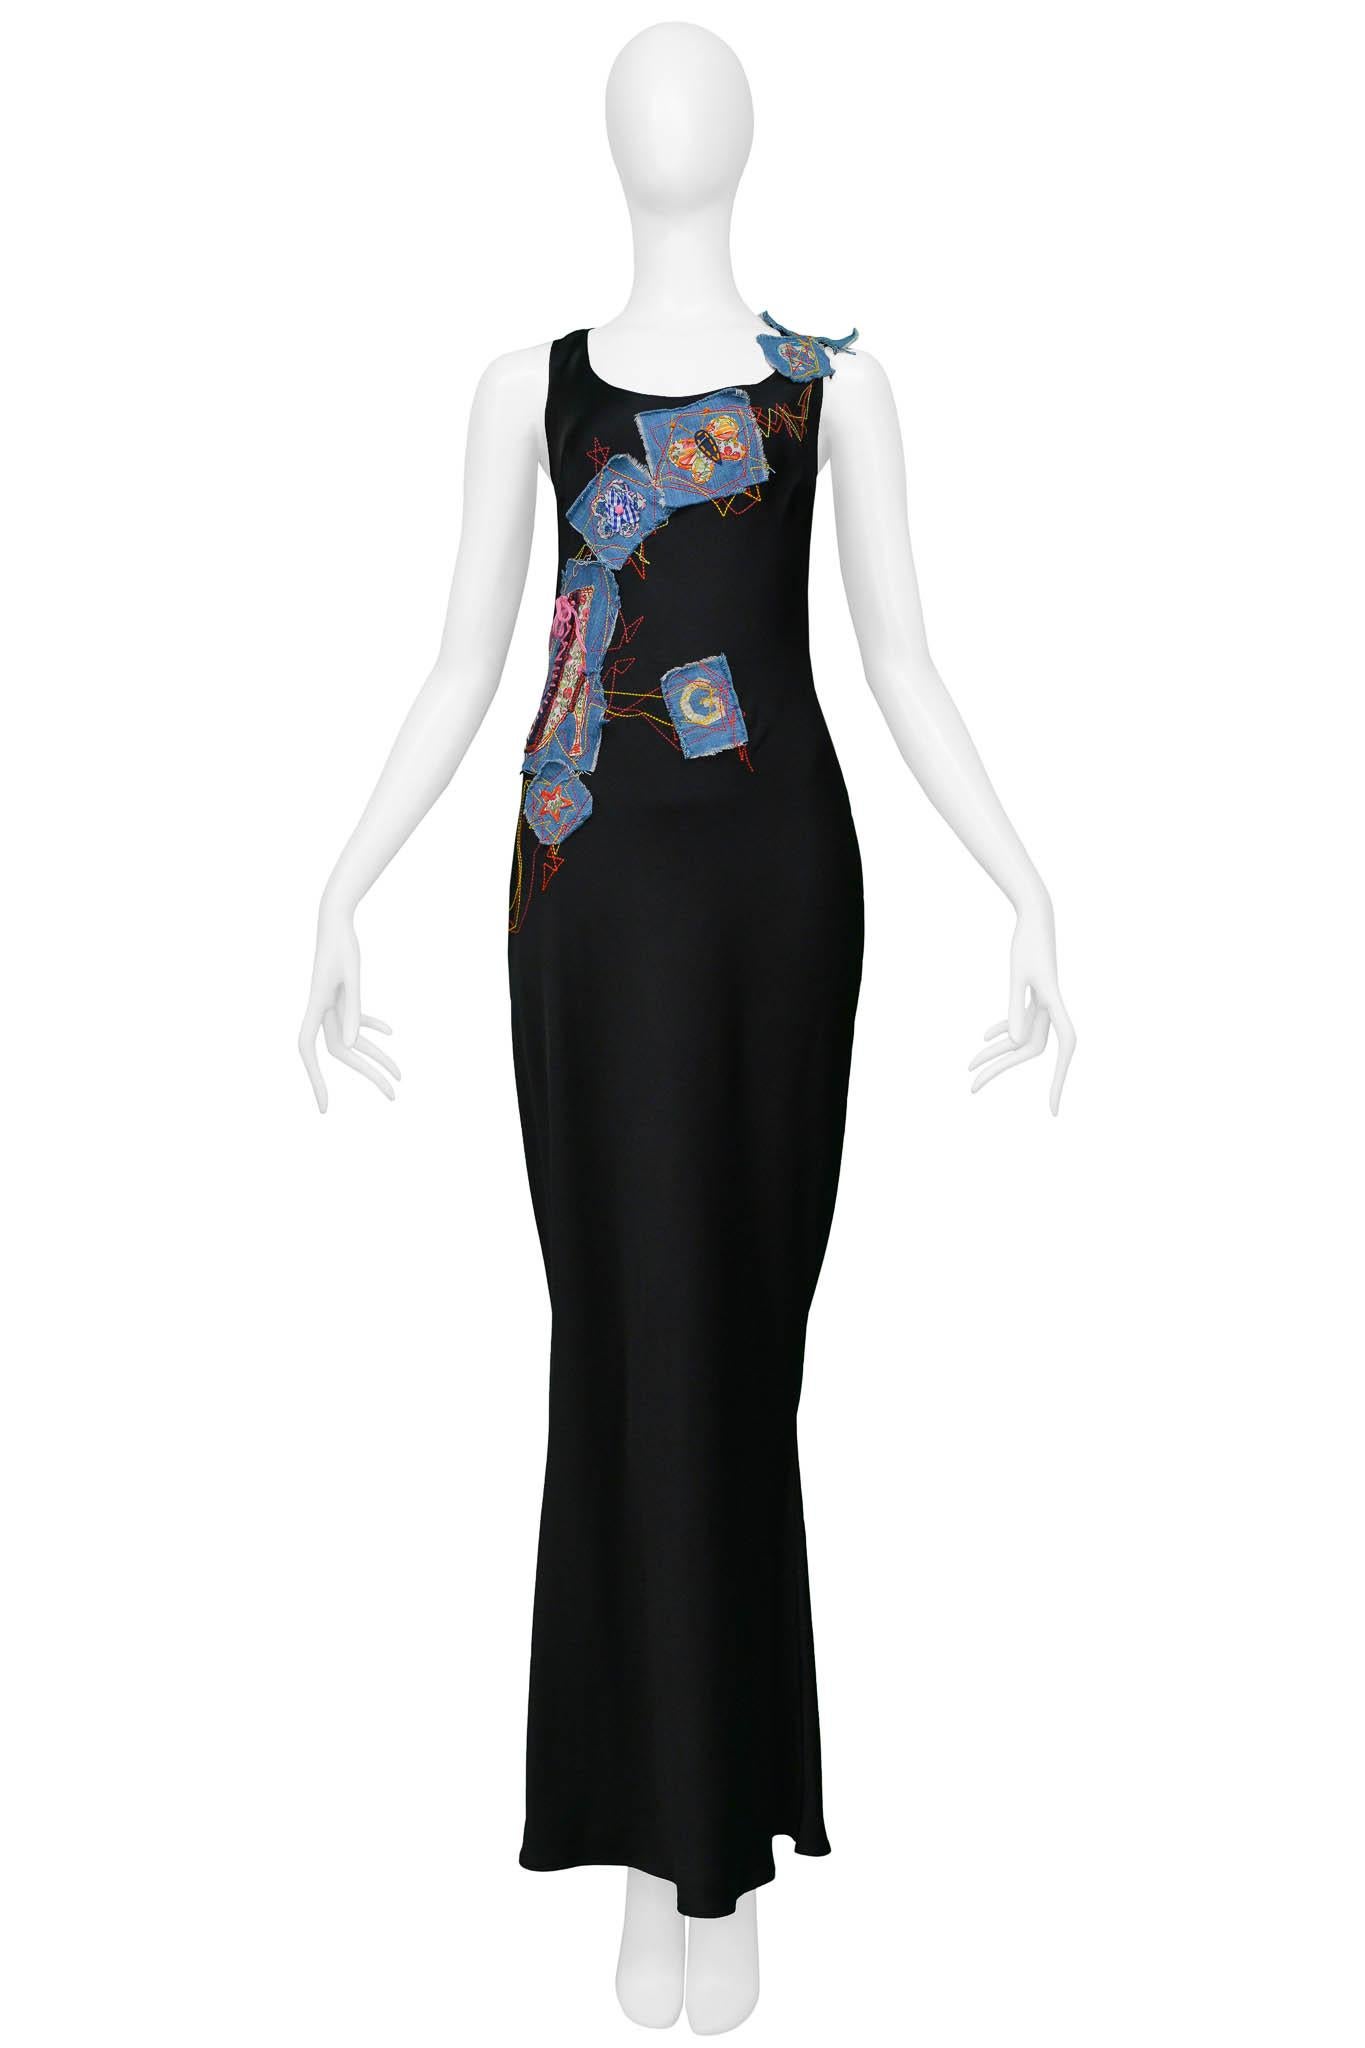 Resurrection is excited to offer a vintage John Galliano black satin gown featuring blue patches with colorful embroidery in the shapes of letters, butterflies, flowers, stars, boots, and a purse.  This dress also features an invisible side seam